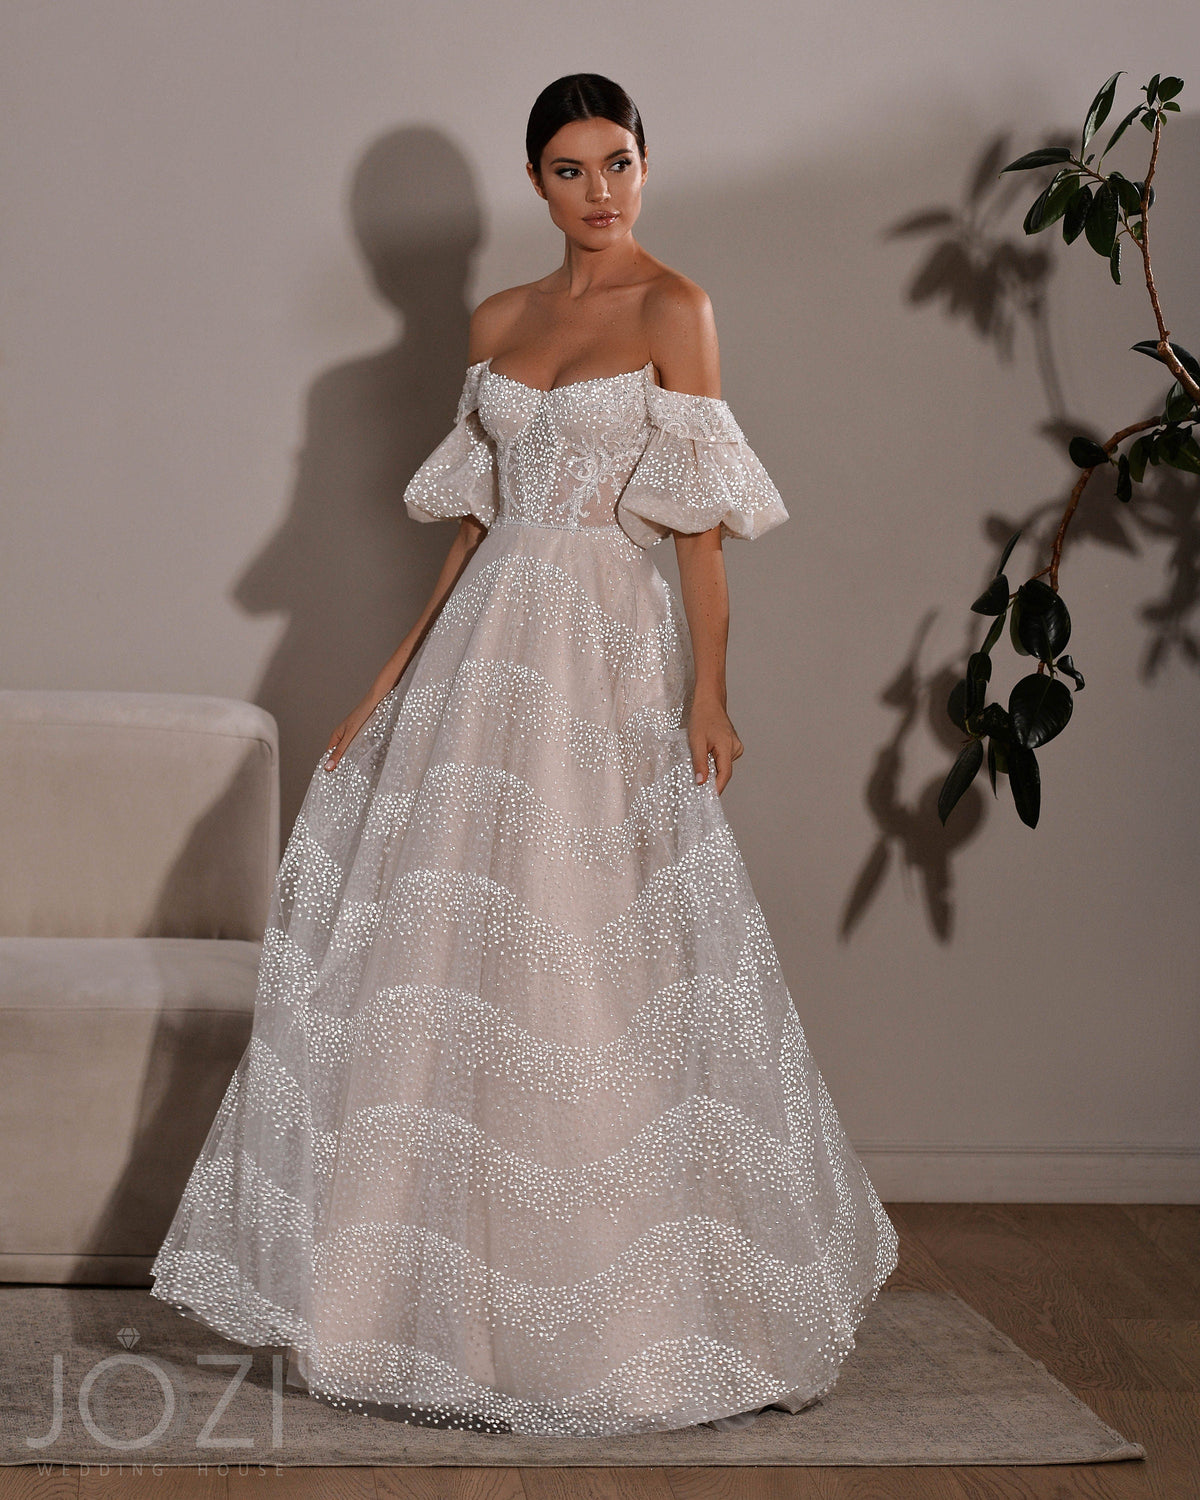 Beautiful Sparkle Unique Design Off The Shoulder Short Puff Sleeve A-Line Wedding Dress Bridal Gown Eye Catching Open Back Corset Lace Up